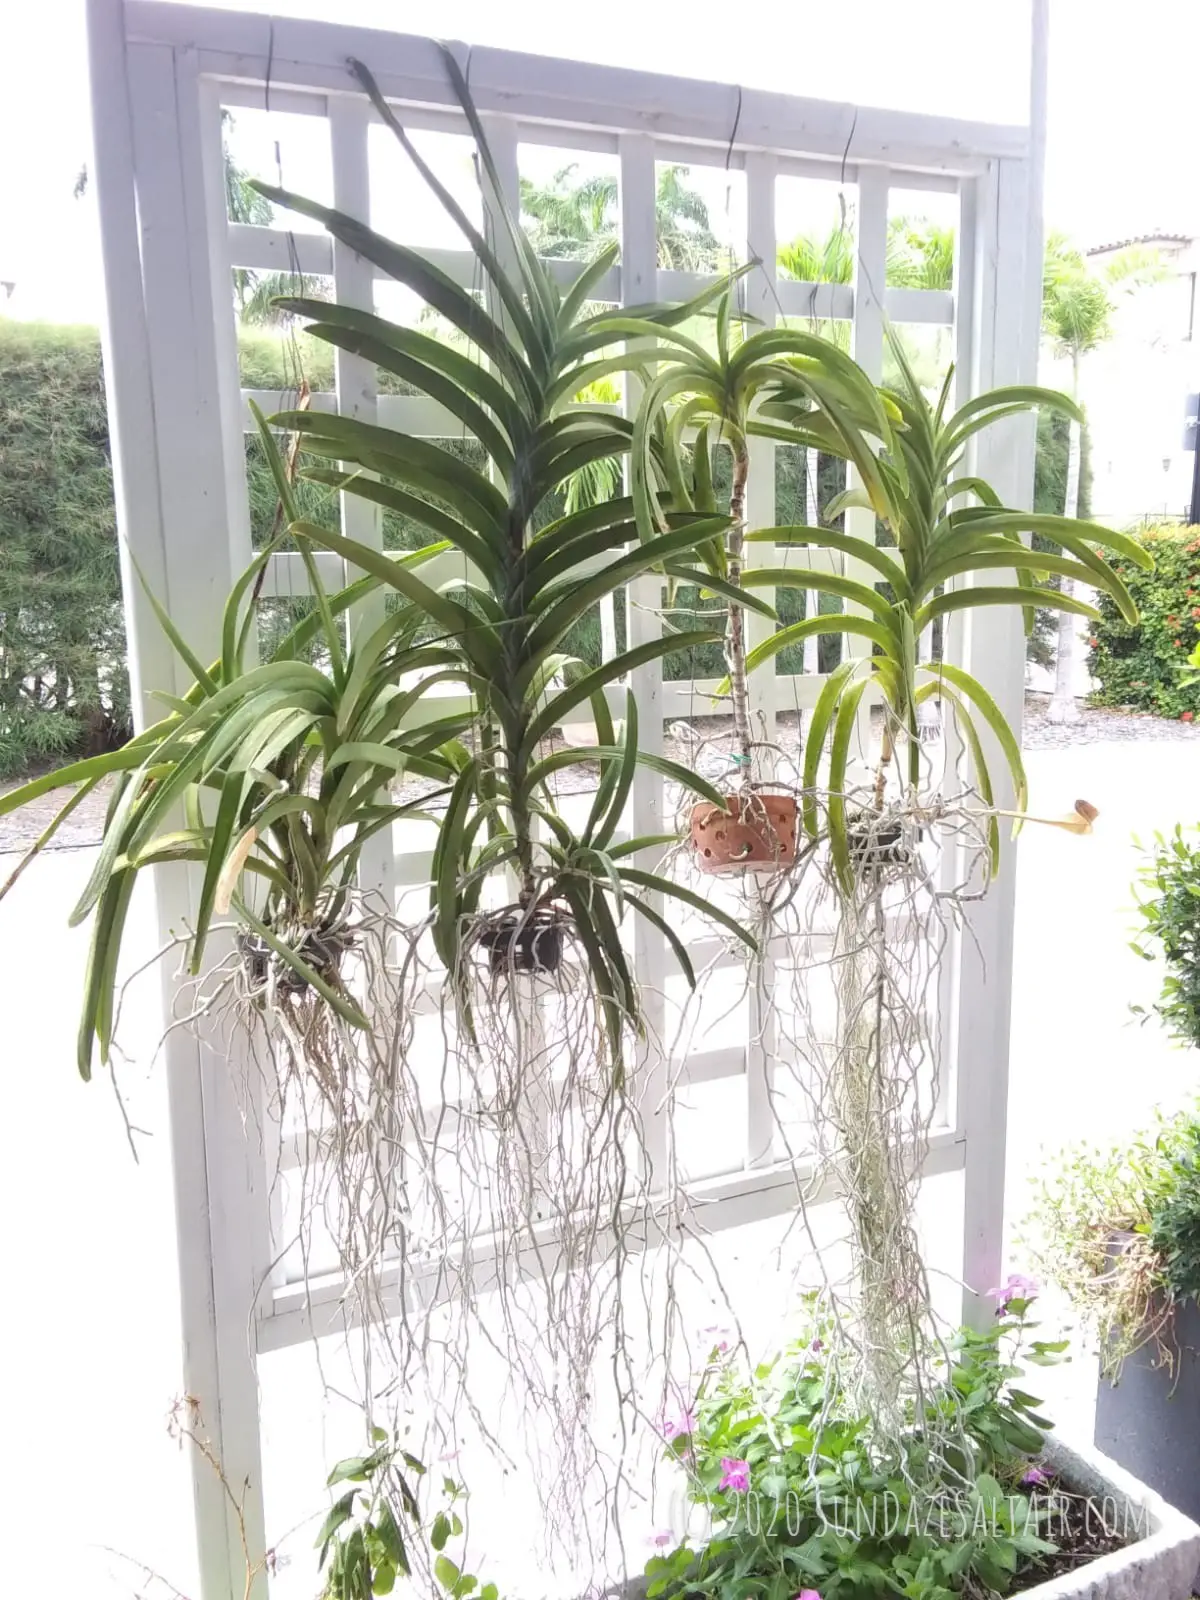 Healthy Strap Leaf Vanda Orchids Hanging From Trellis And Getting Ready To Bloom